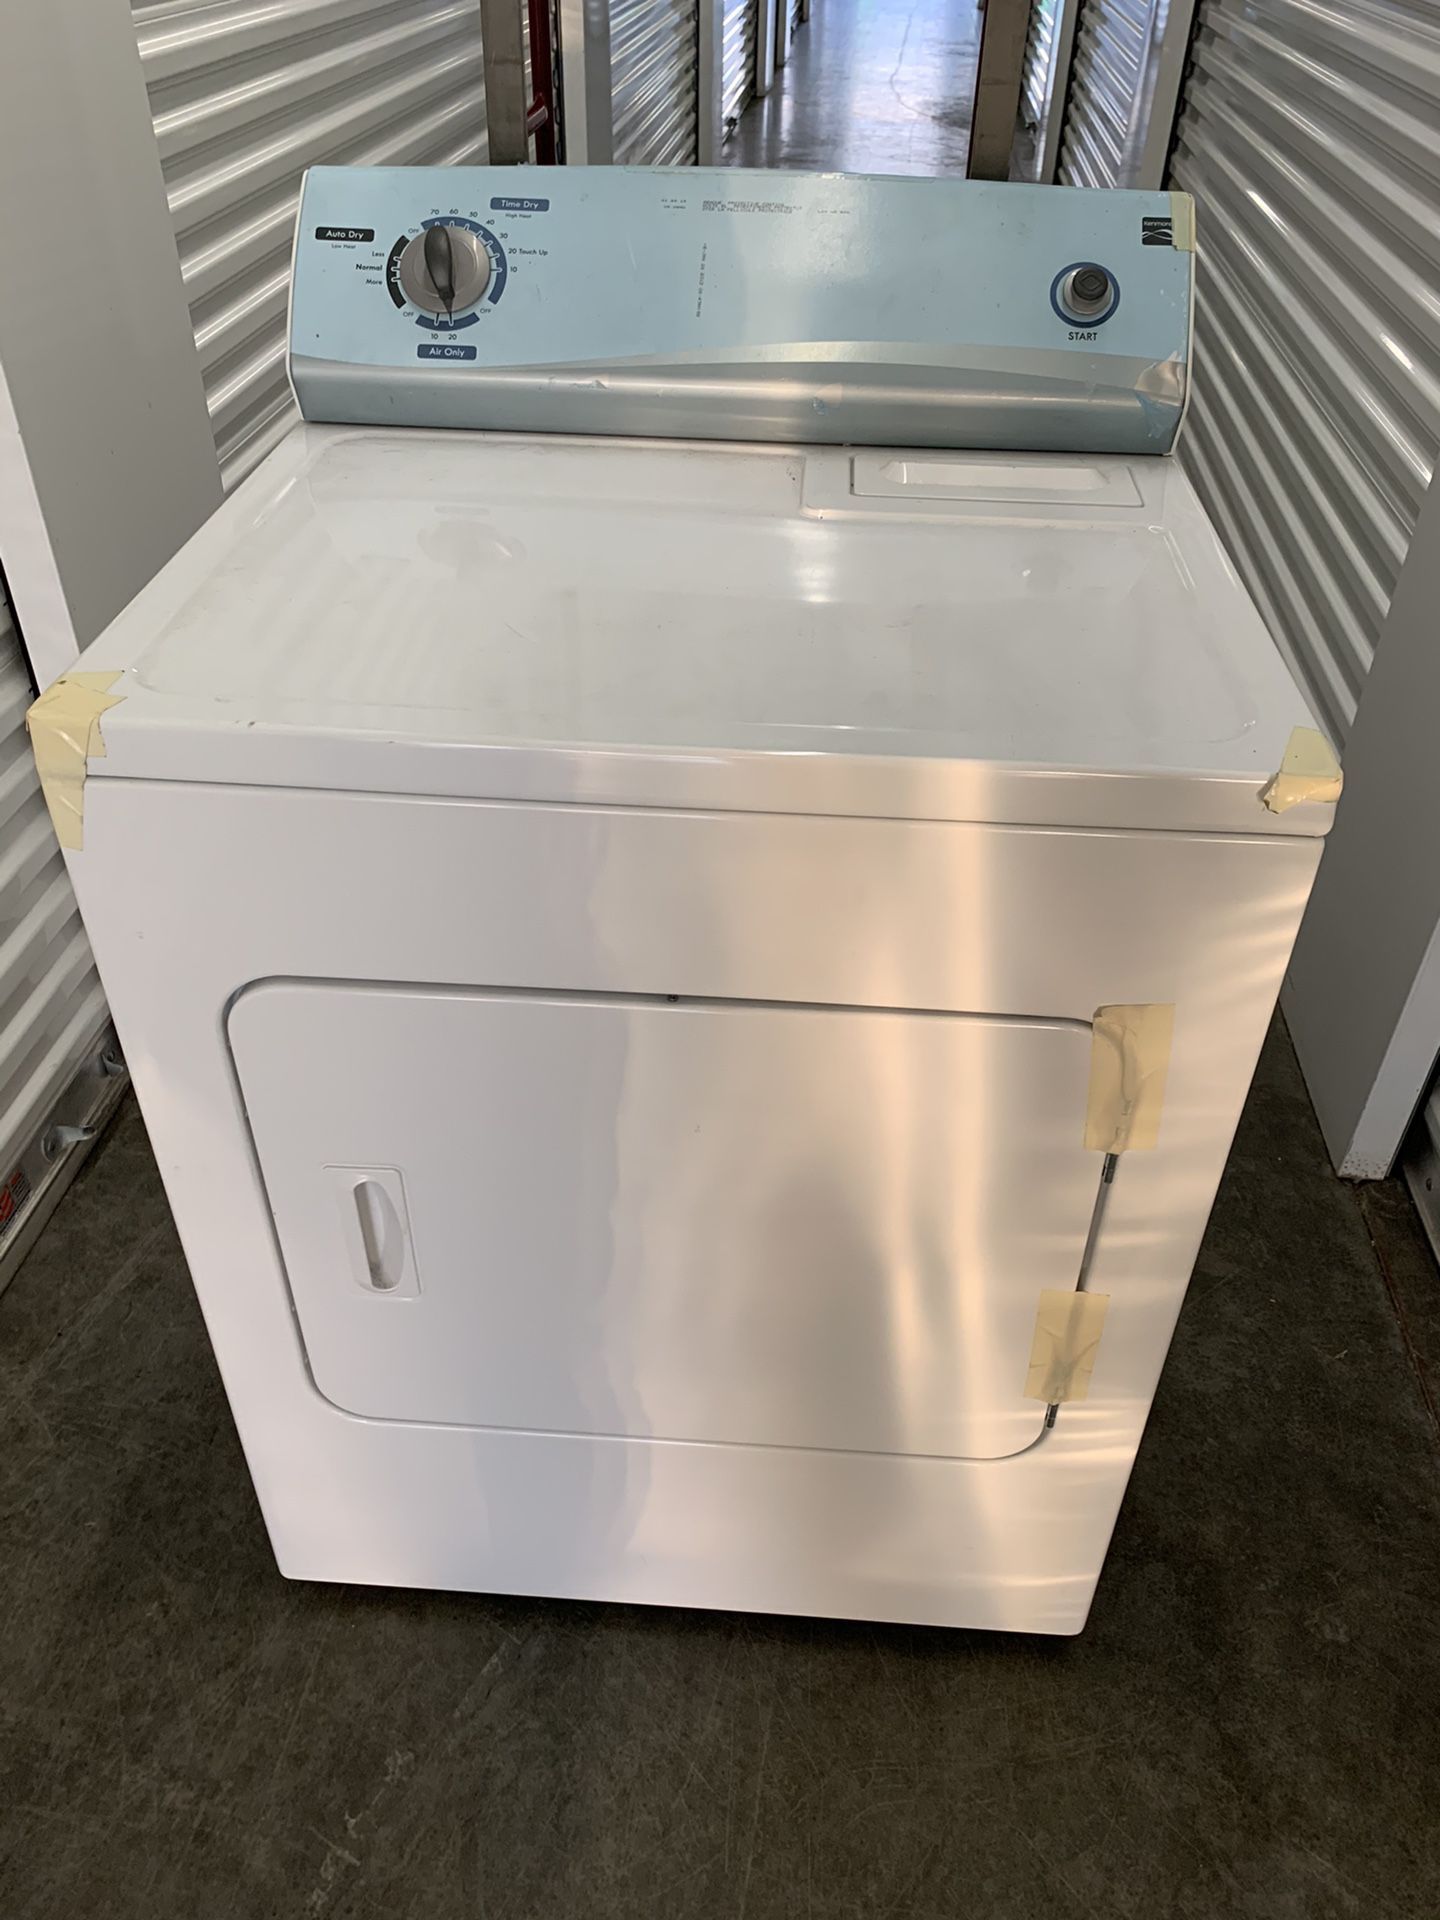 Kenmore Washer & Dryer set like brand new for sale !!!